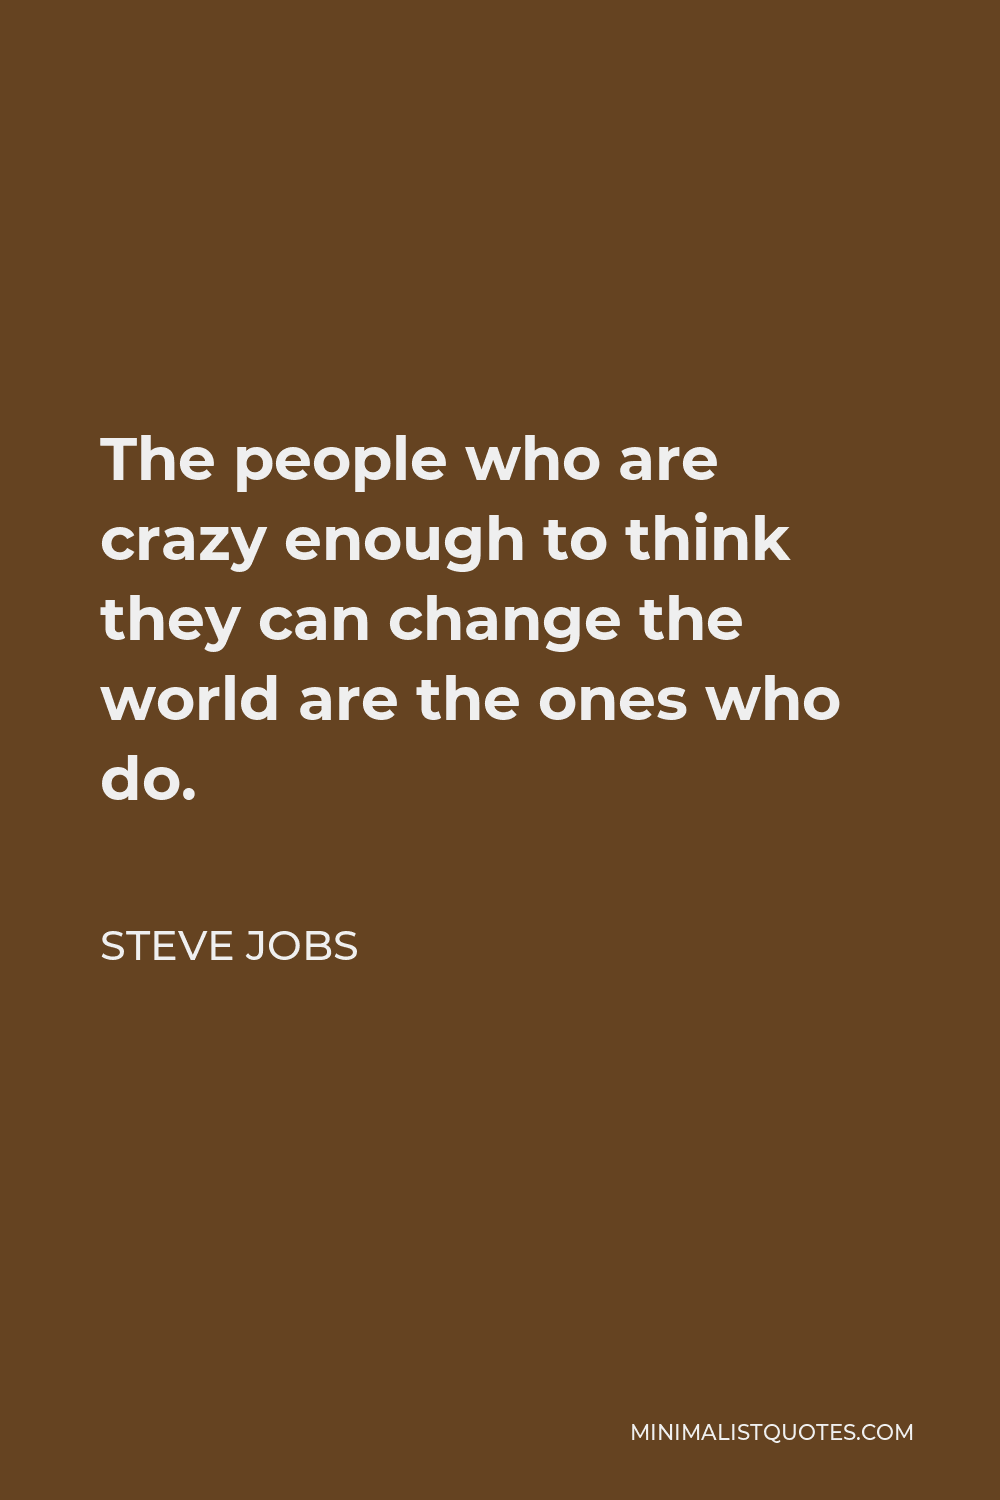 Steve Jobs Quote: The people who are crazy enough to think they can ...